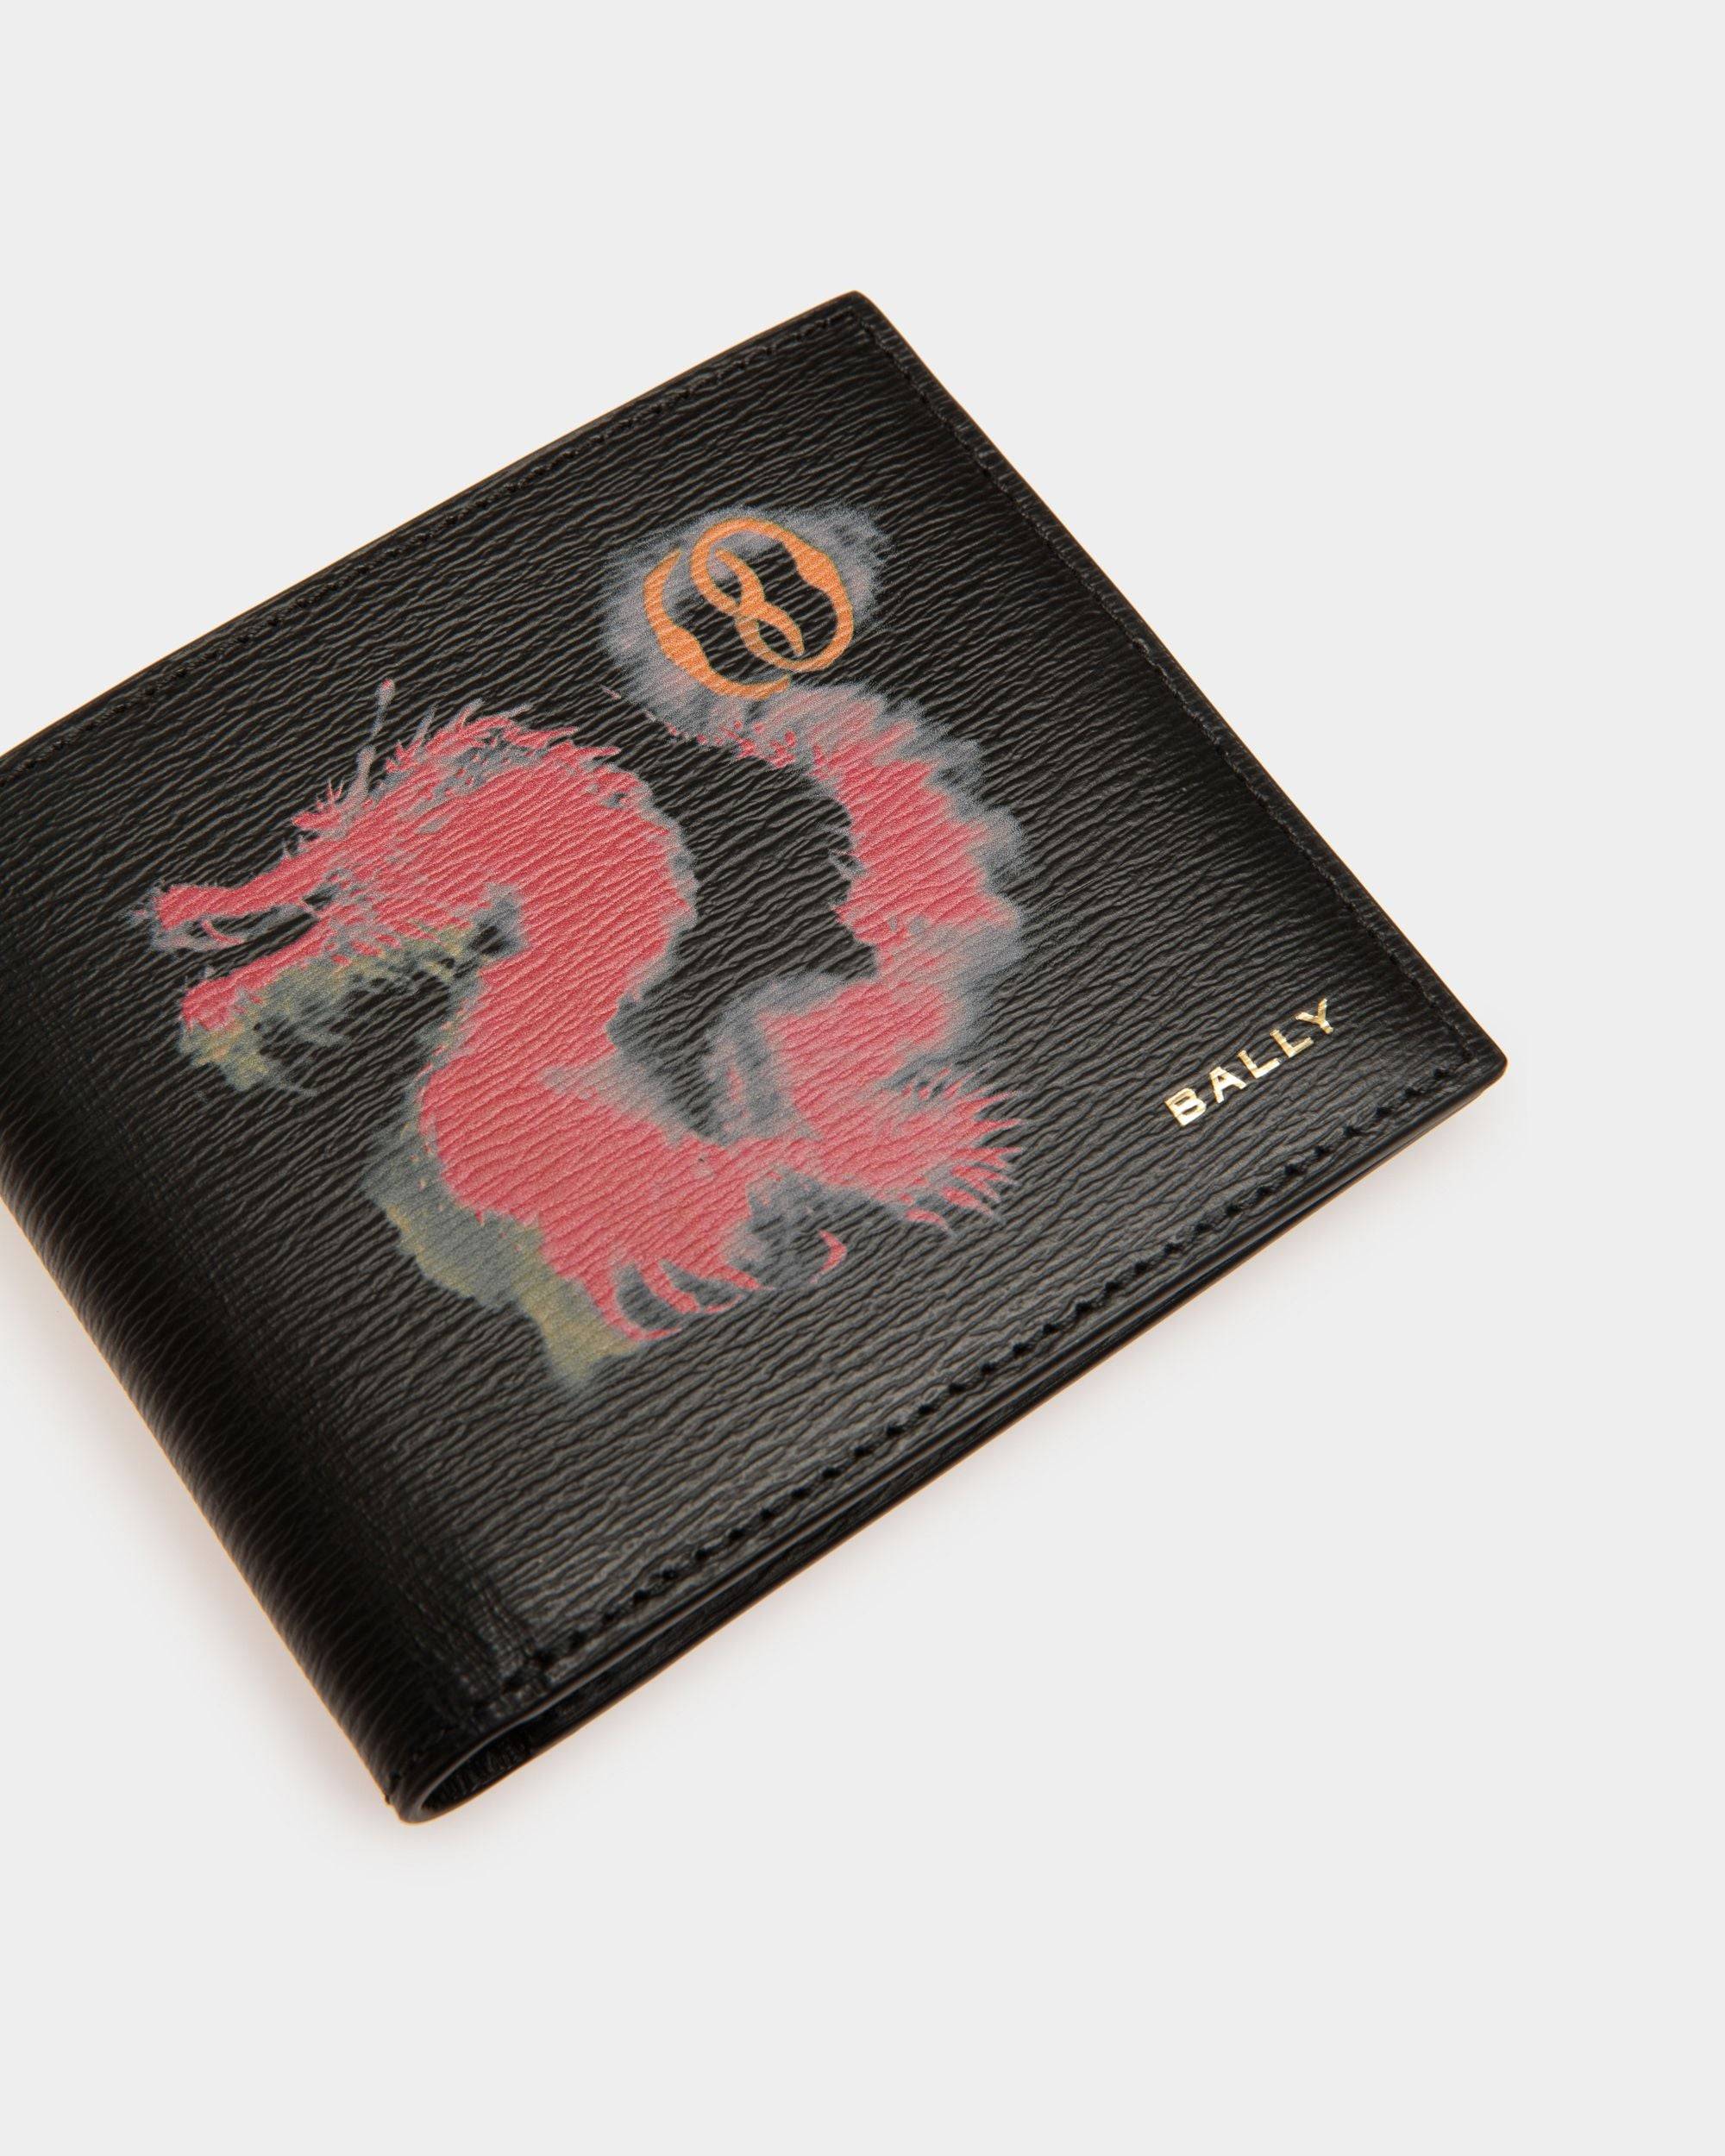 Cny | Men's Bifold Wallet in Black And Red Grained Leather | Bally | Still Life Detail